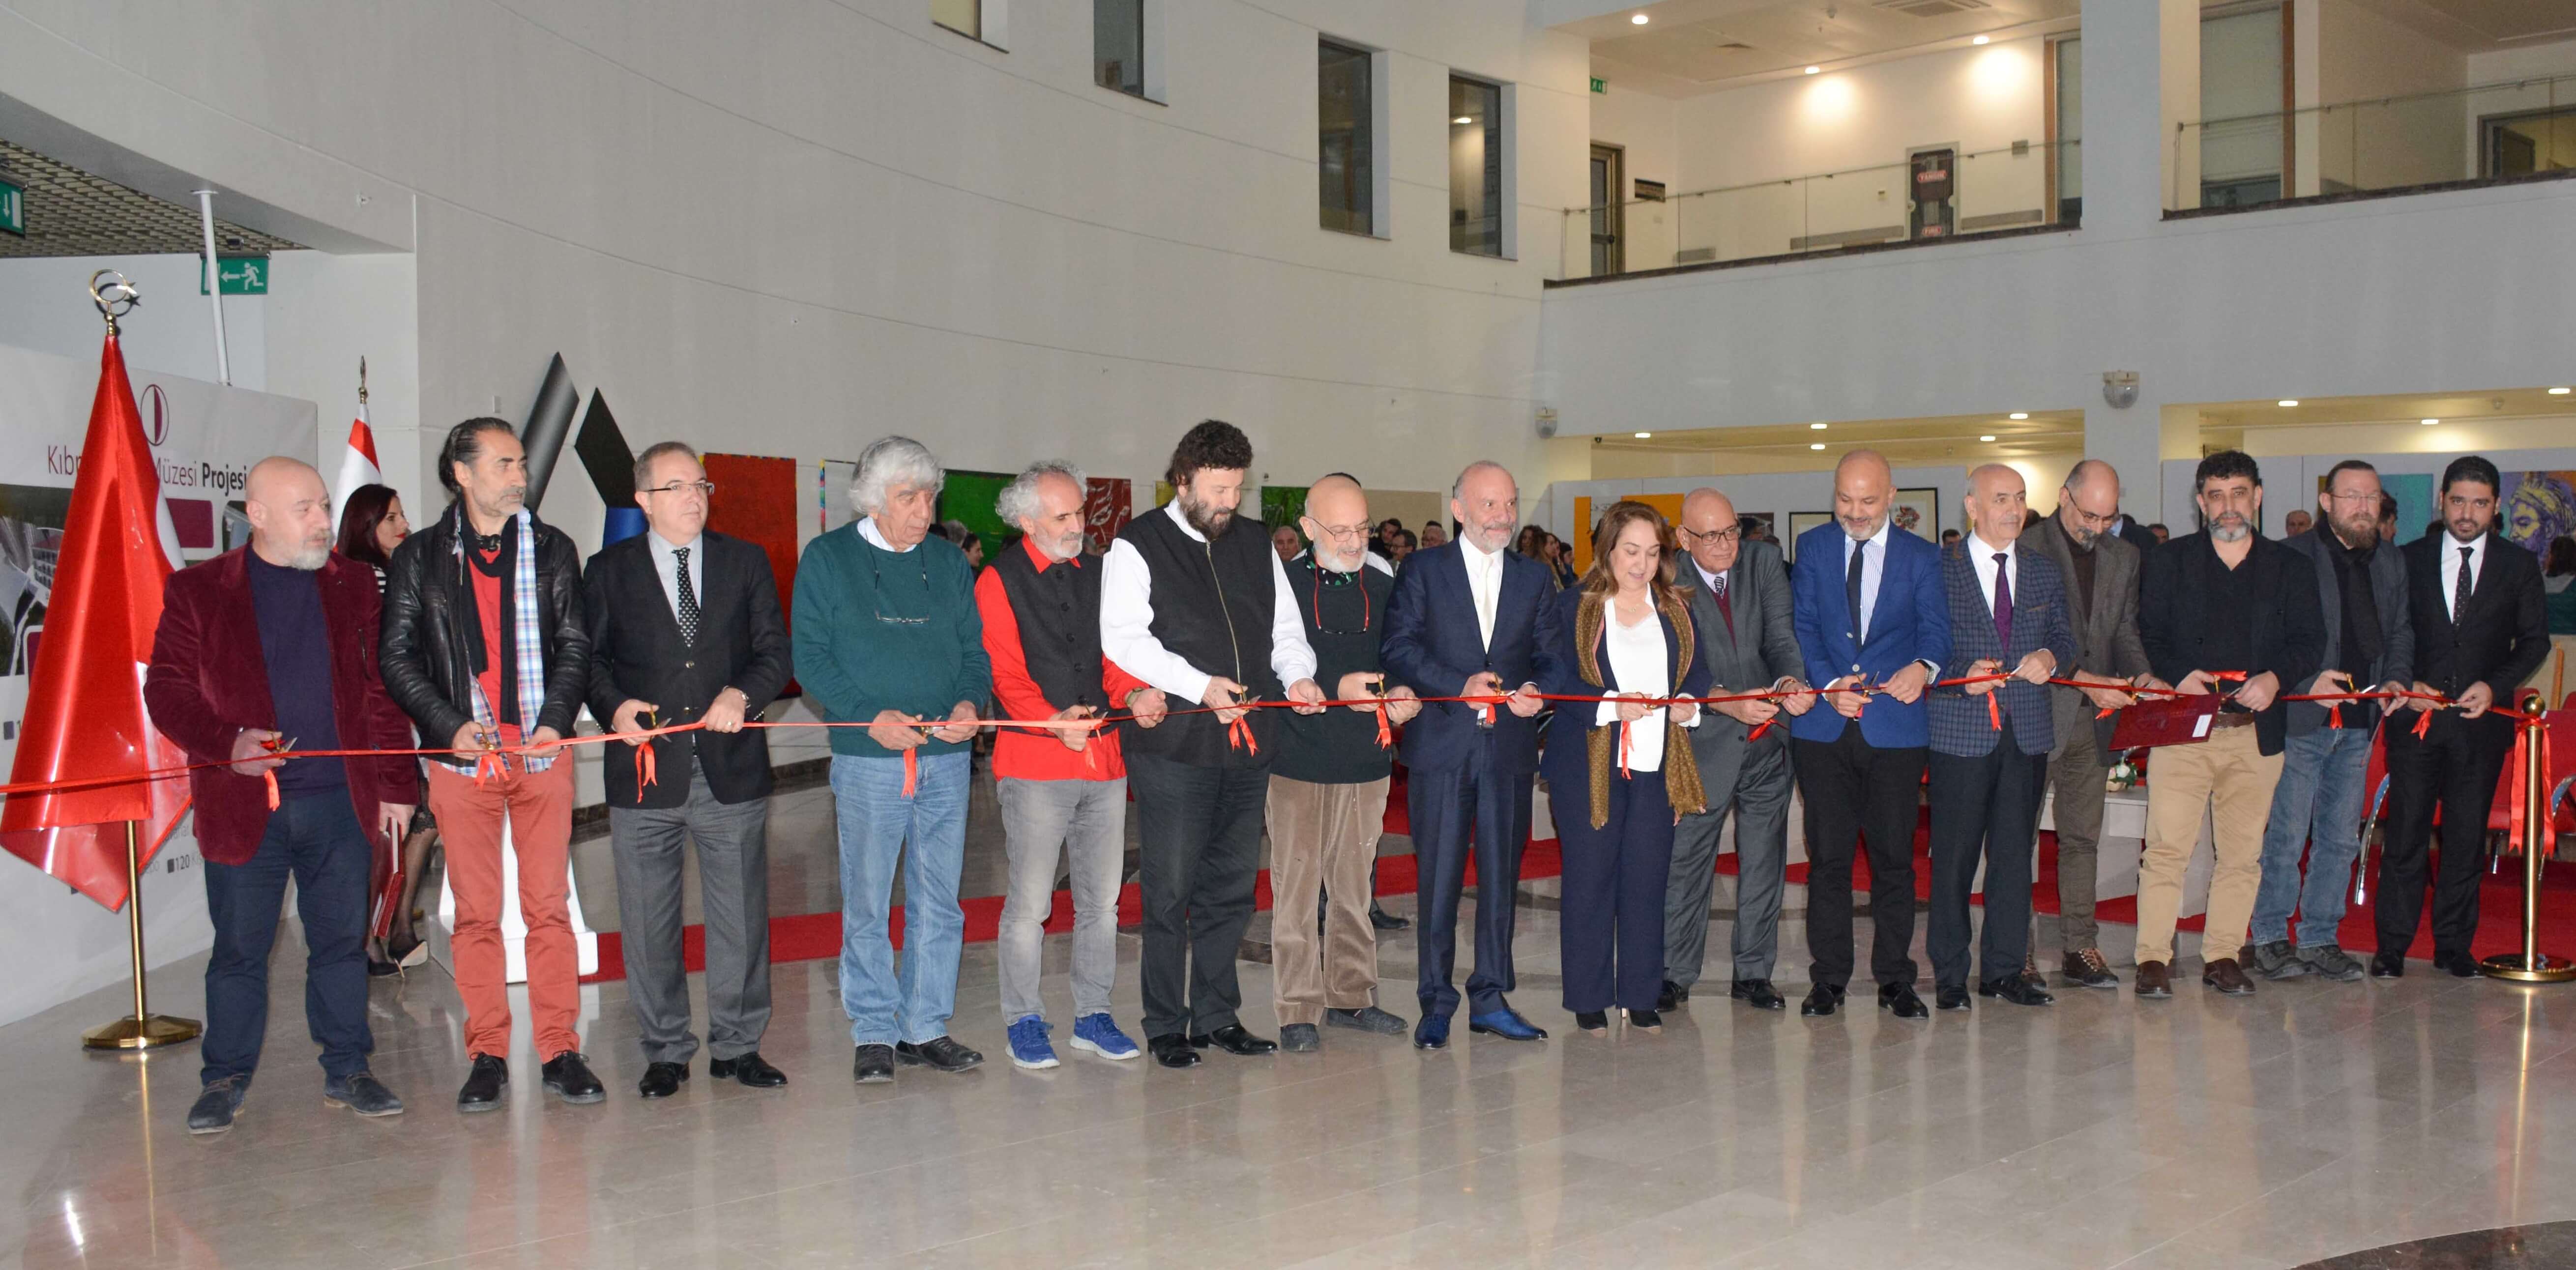 Exhibition of Turkish Artists’ 40 Paintings “Painting Exhibition of Turkish Artists” has been opened at the Near East University